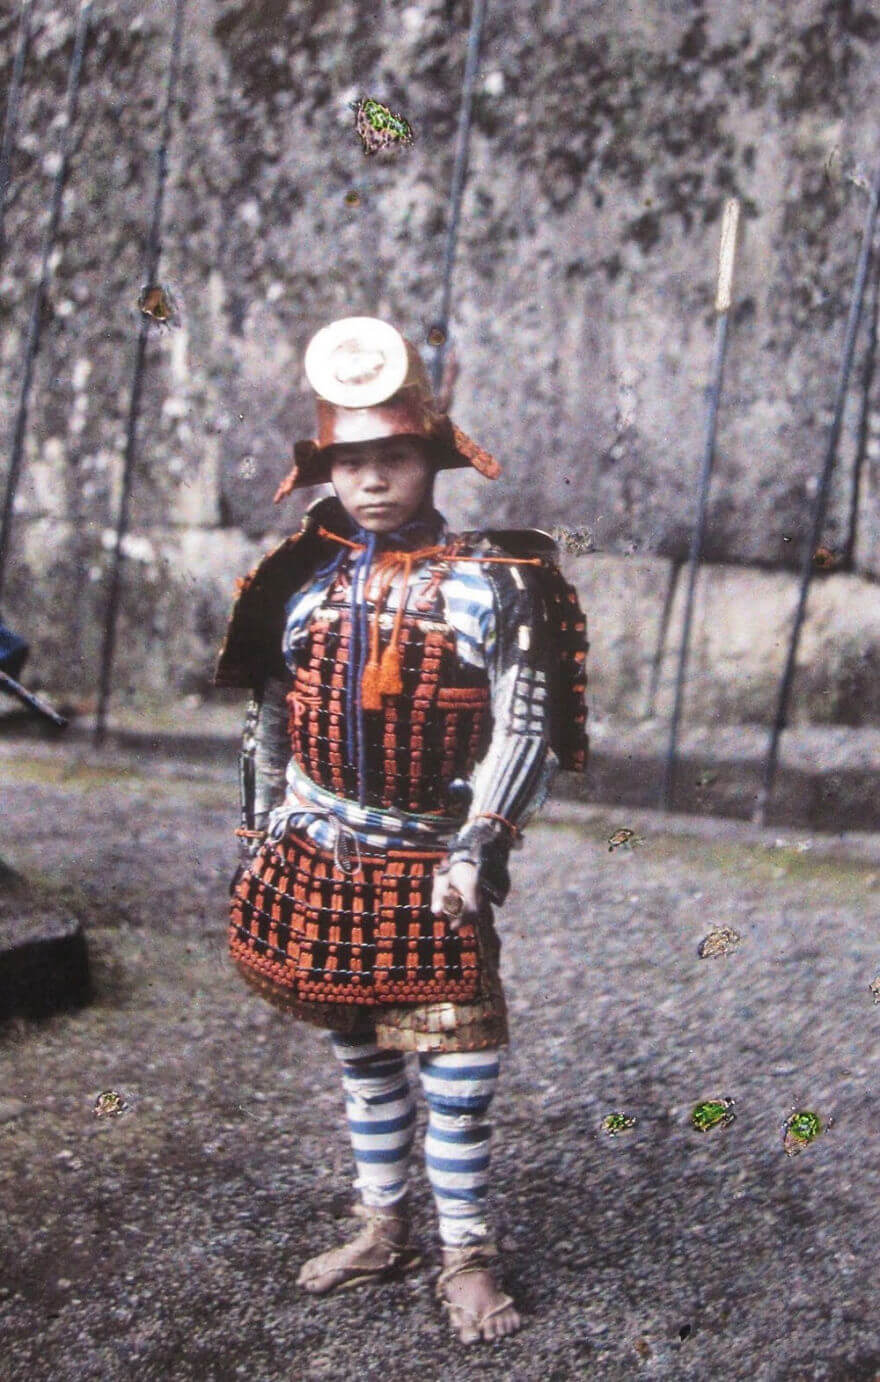 40 Old Color Pictures Show Our World A Century Ago - Apan (Young Samurai), 1912